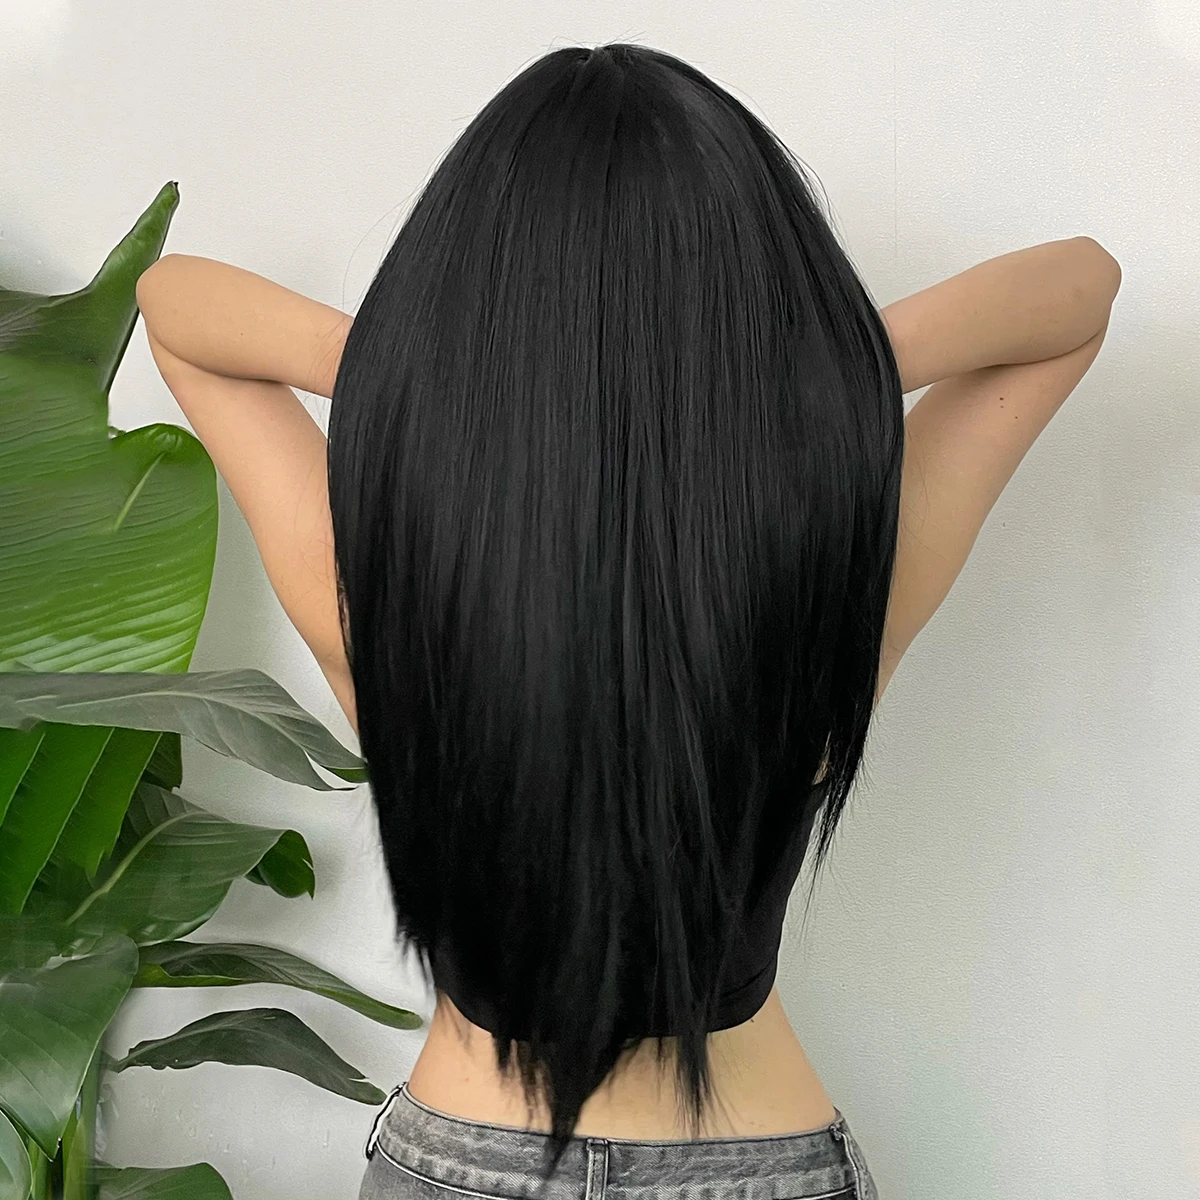 Black Lolita Wigs for Women Long Straight Synthetic Fiber Wig with Bangs Natural Looking Heat Resistant for Daily Cosplay Use